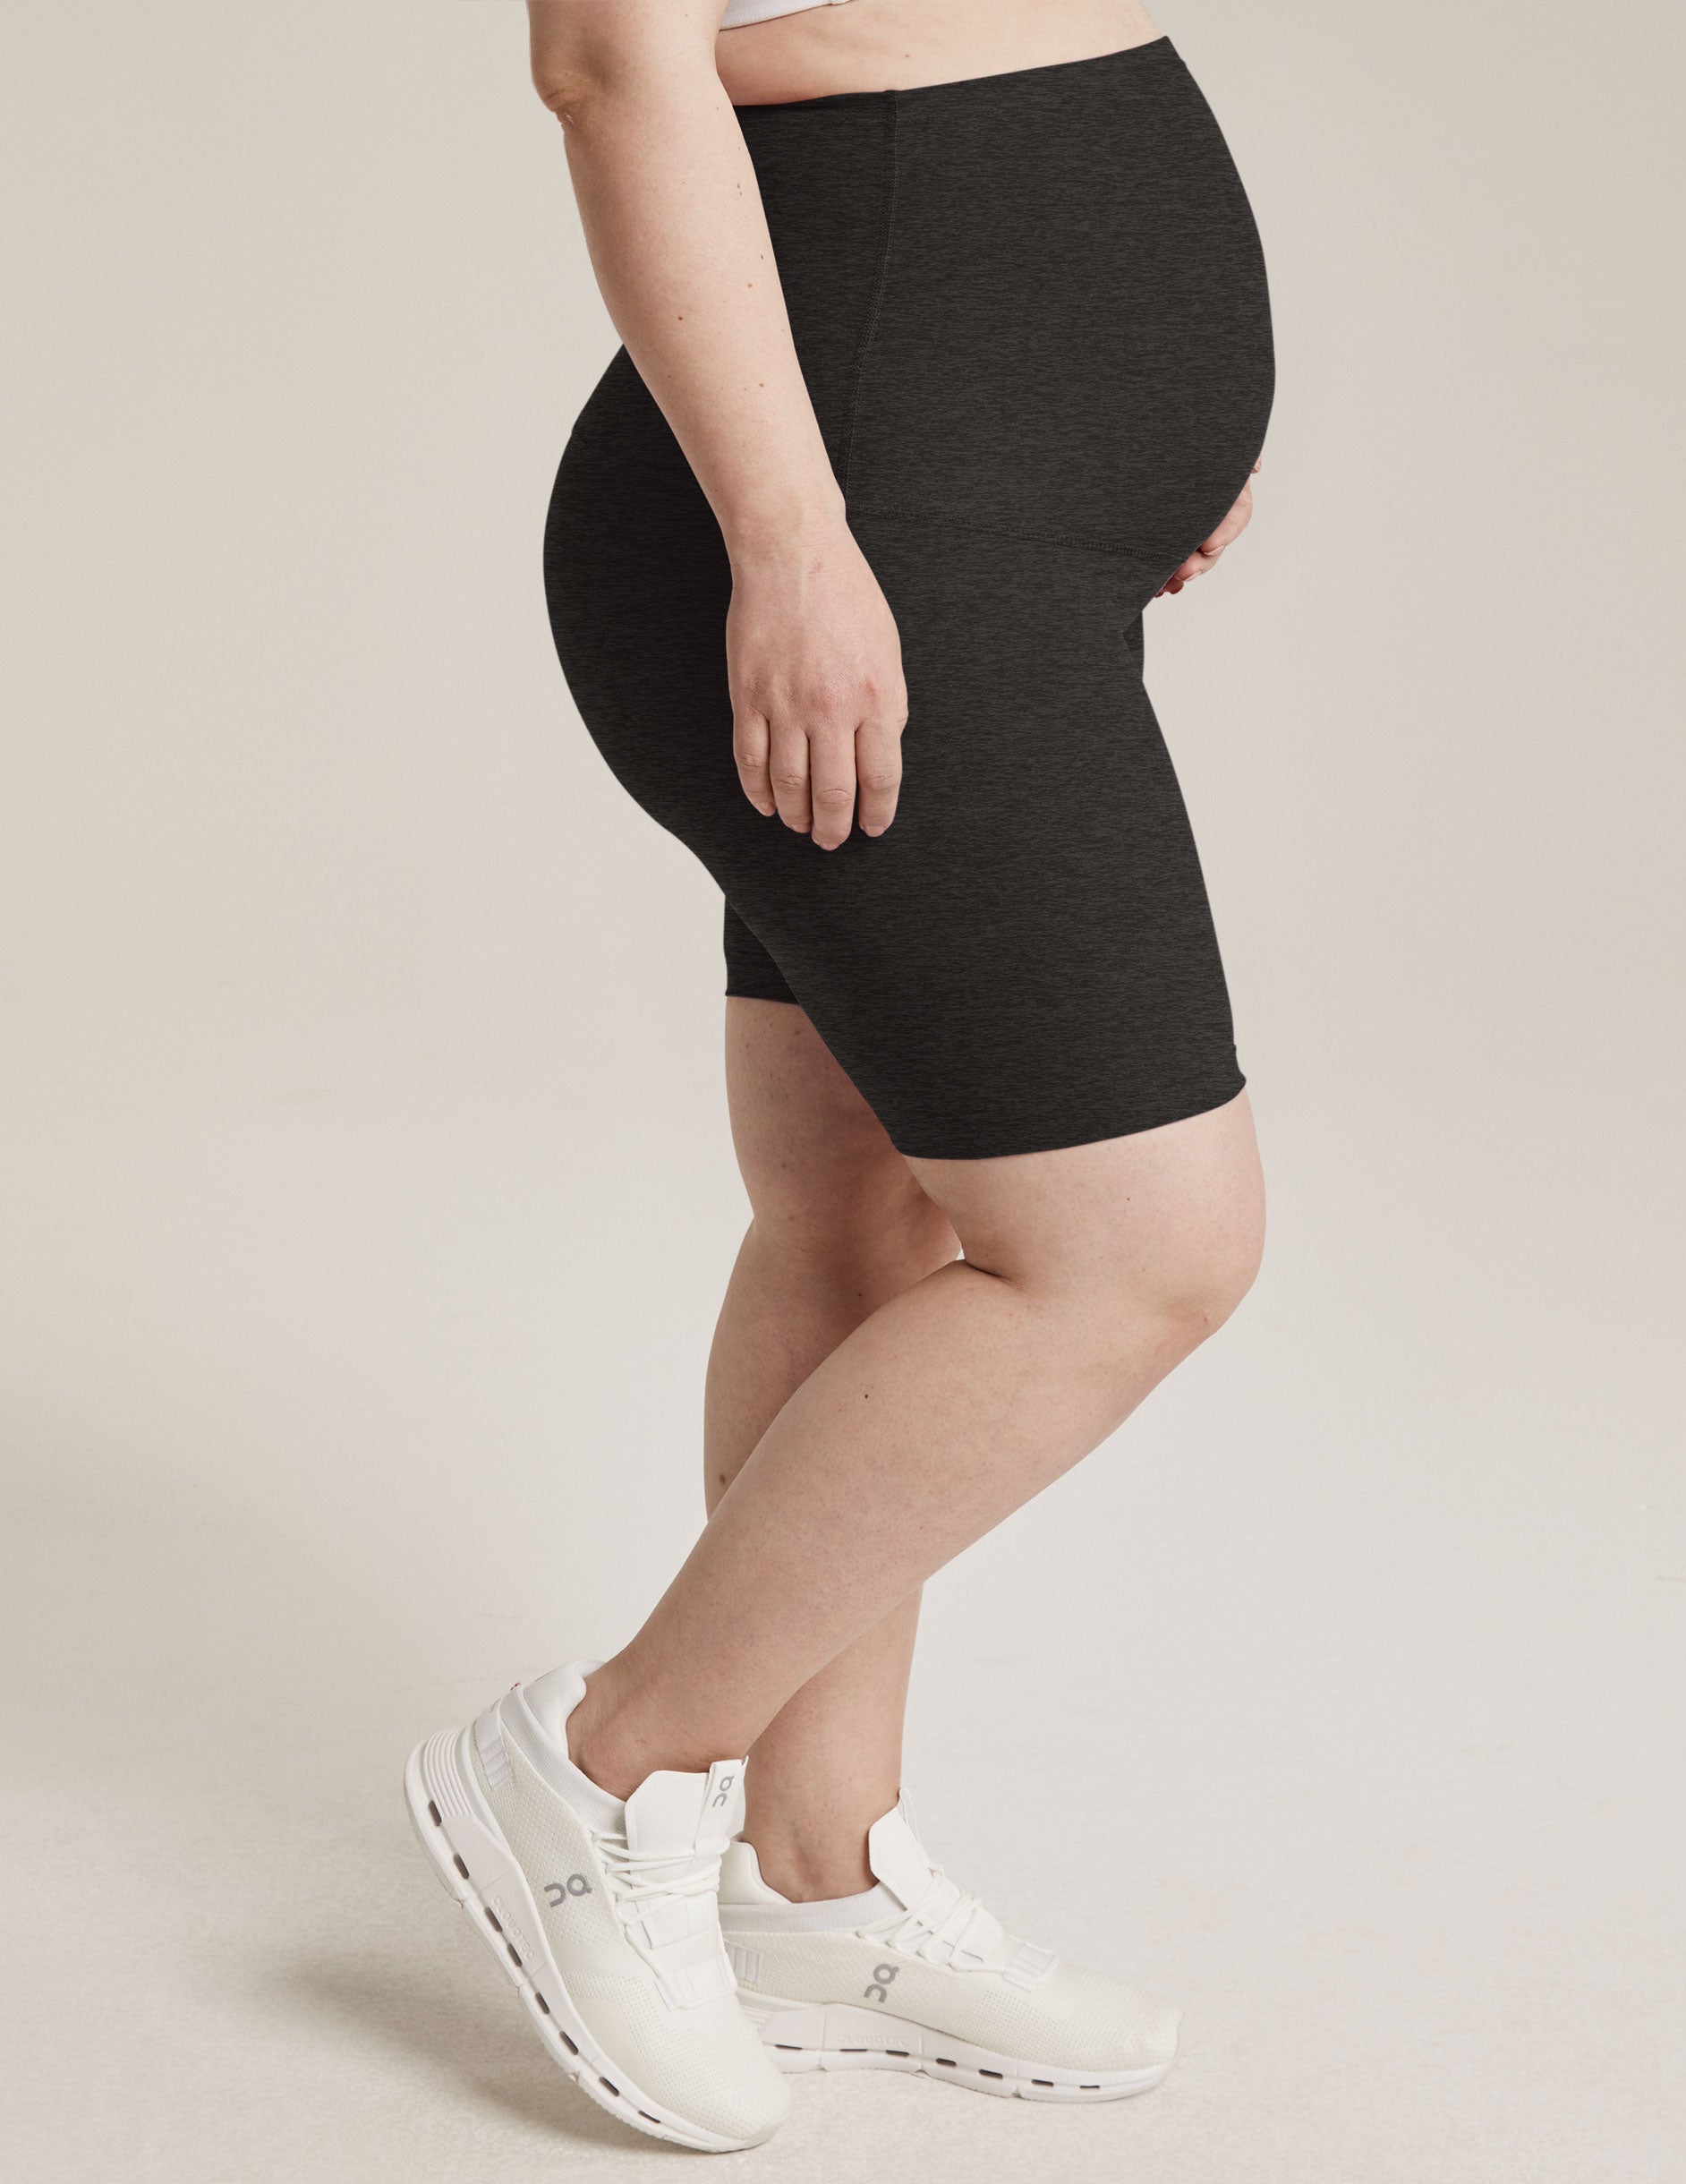 Comfy Maternity Seamless Biker Short For Women Perfect For Yoga, Active  Workouts And Summer Set 230717 From Landong01, $18.94